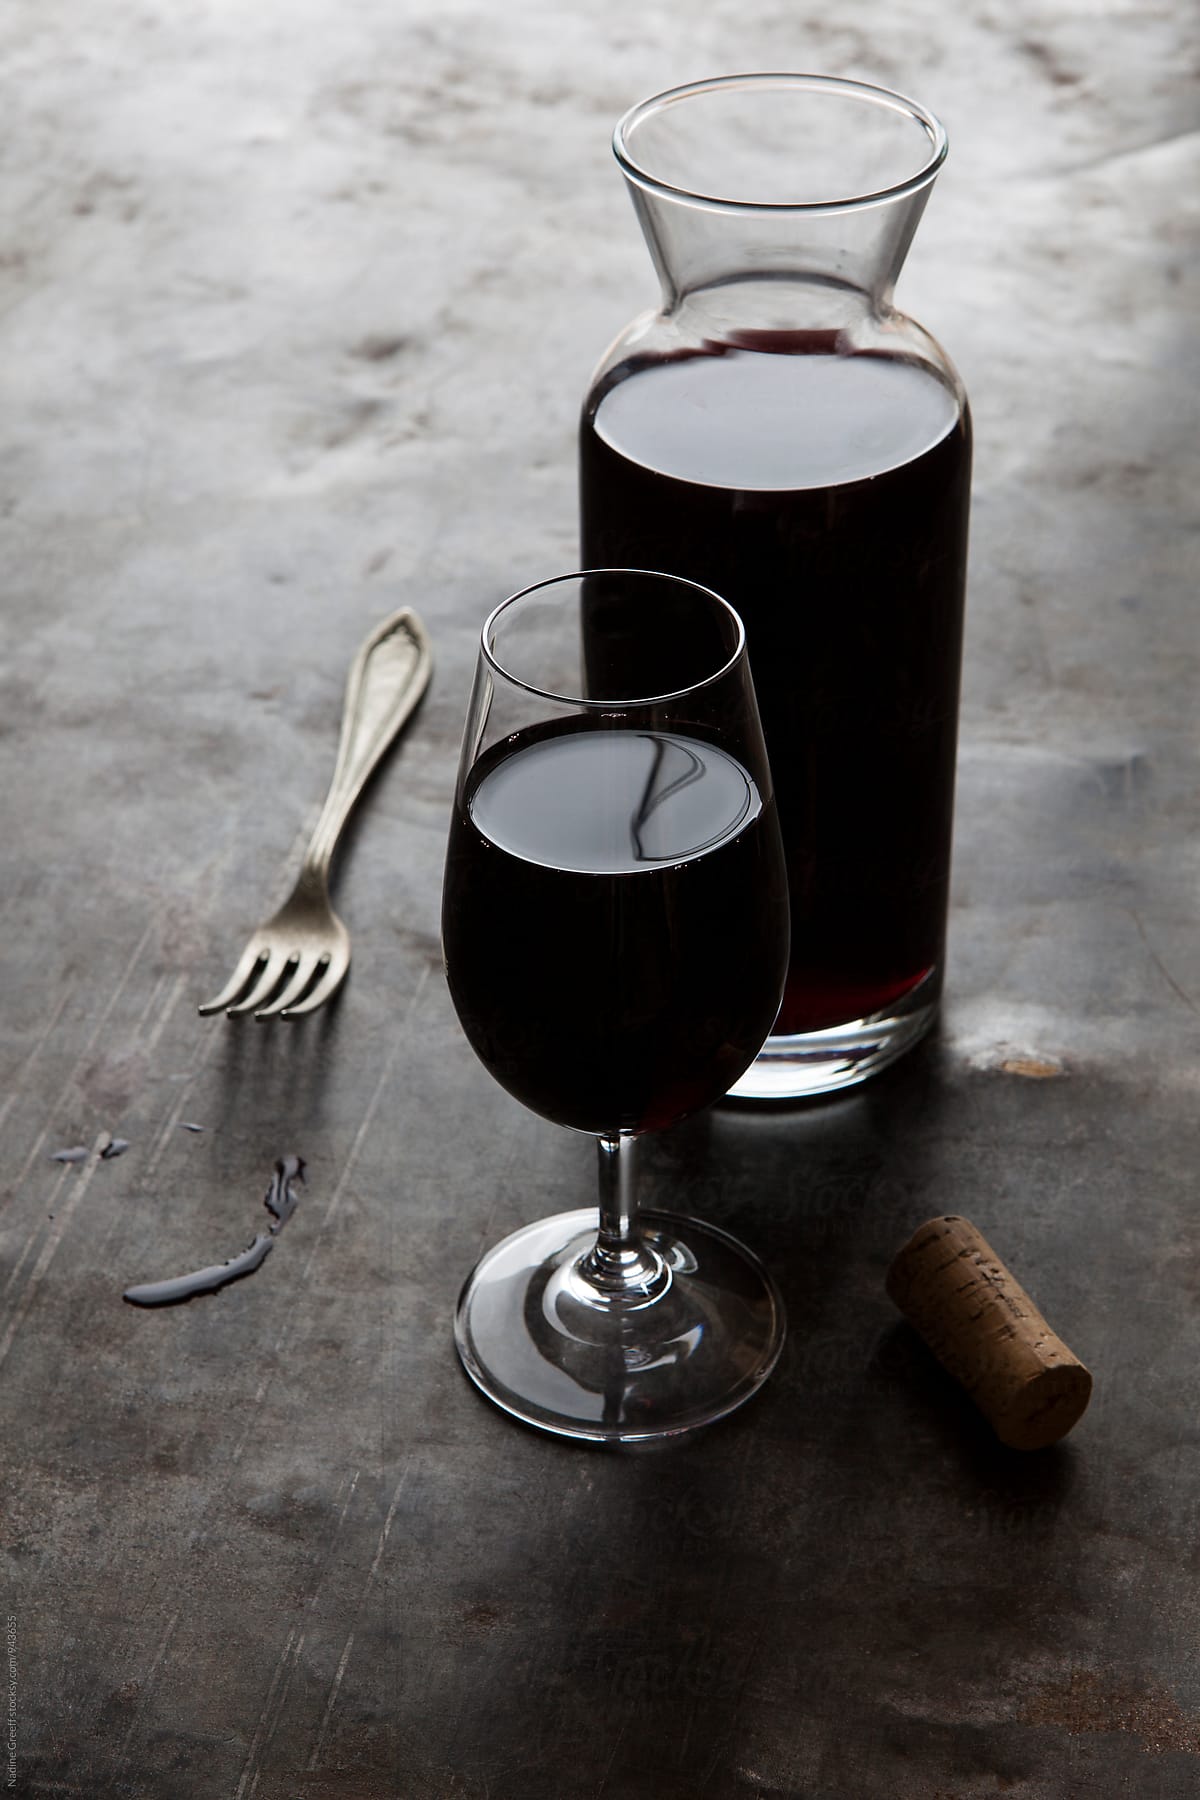 Wine carafe with glass of red wine, spills, fork and a cork